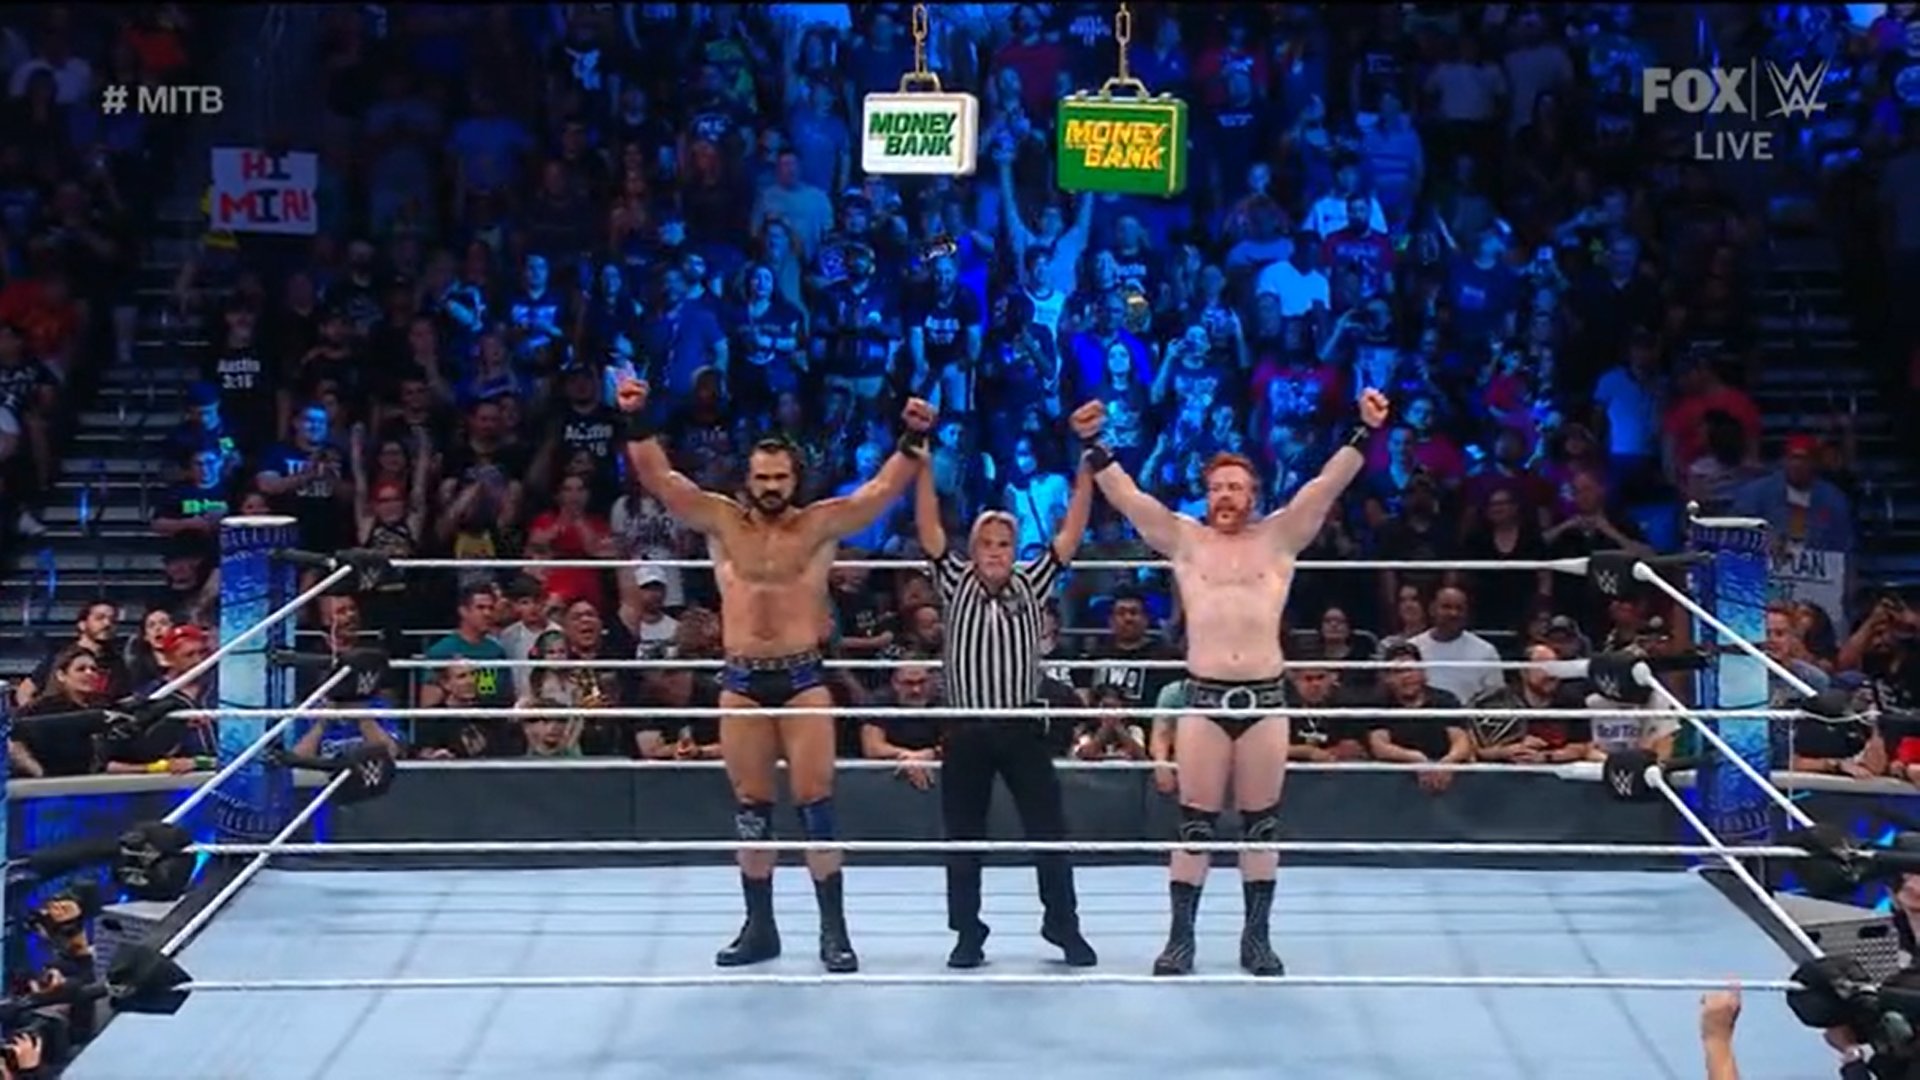 WWE SmackDown Results: Drew McIntyre and Sheamus Defeat The Usos to Qualify for the MITB ladder match